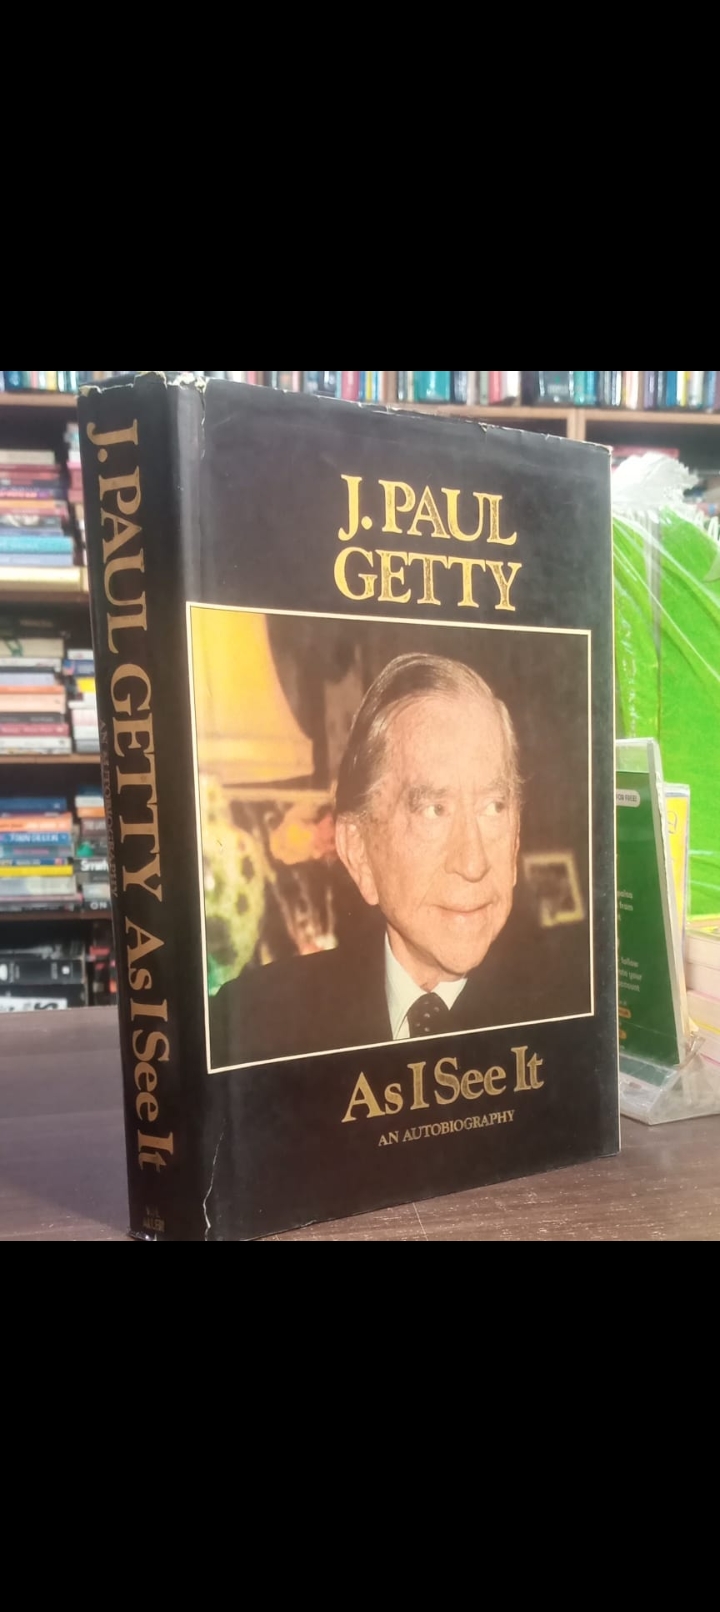 as i see it an autobiography by j.paul getty. original hardcove